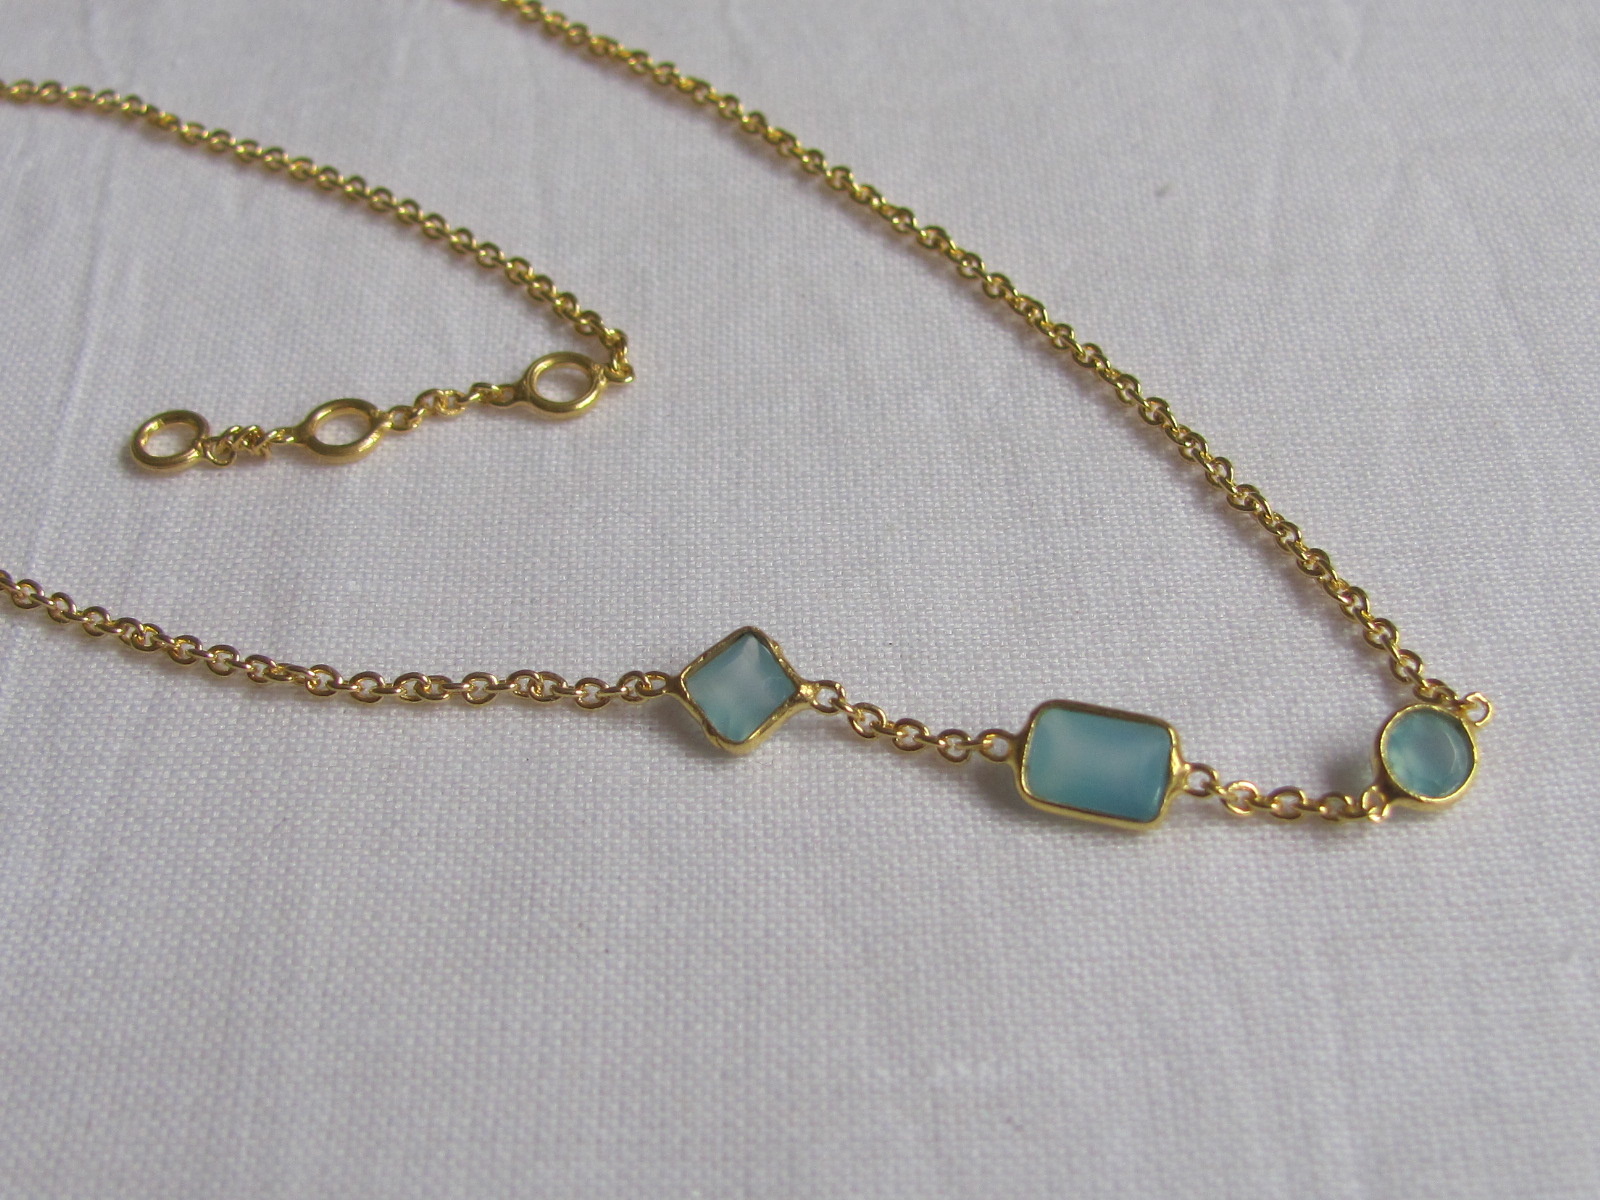 Necklace gold on silver with calceadon stones